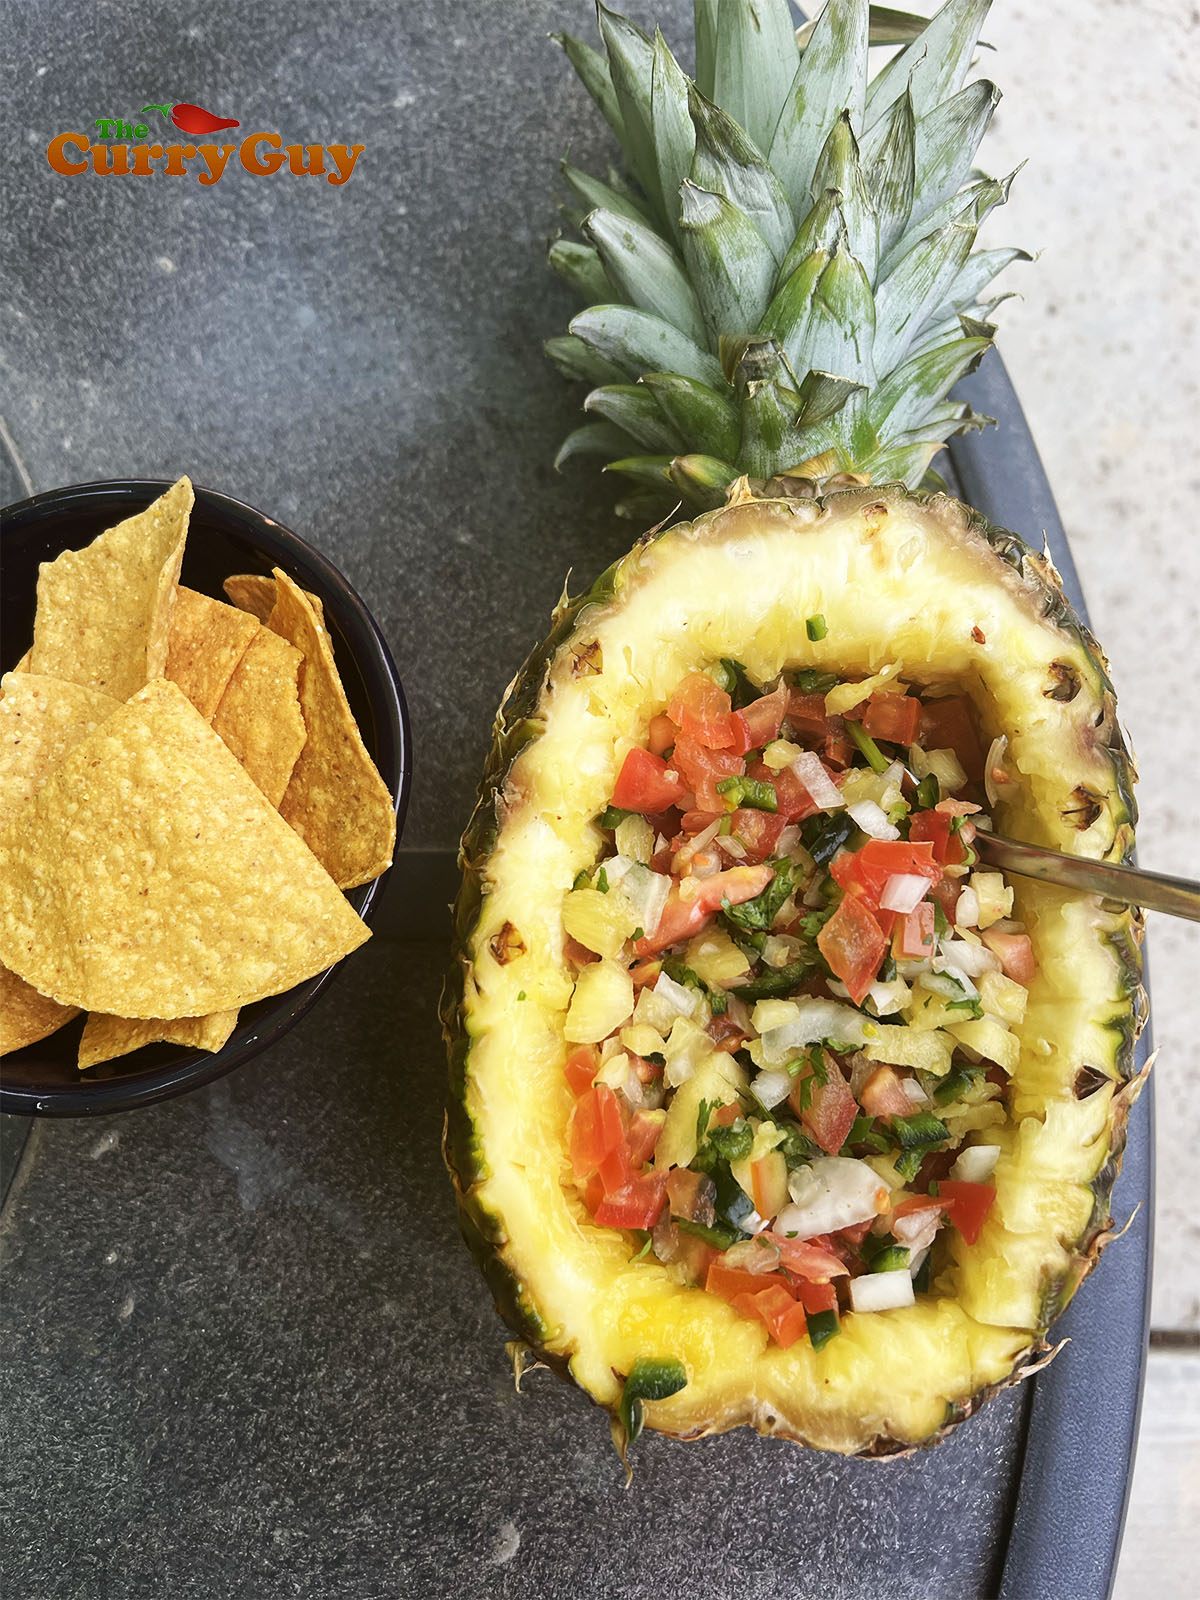 Pineapple salsa served in a hallowed out pineapple.